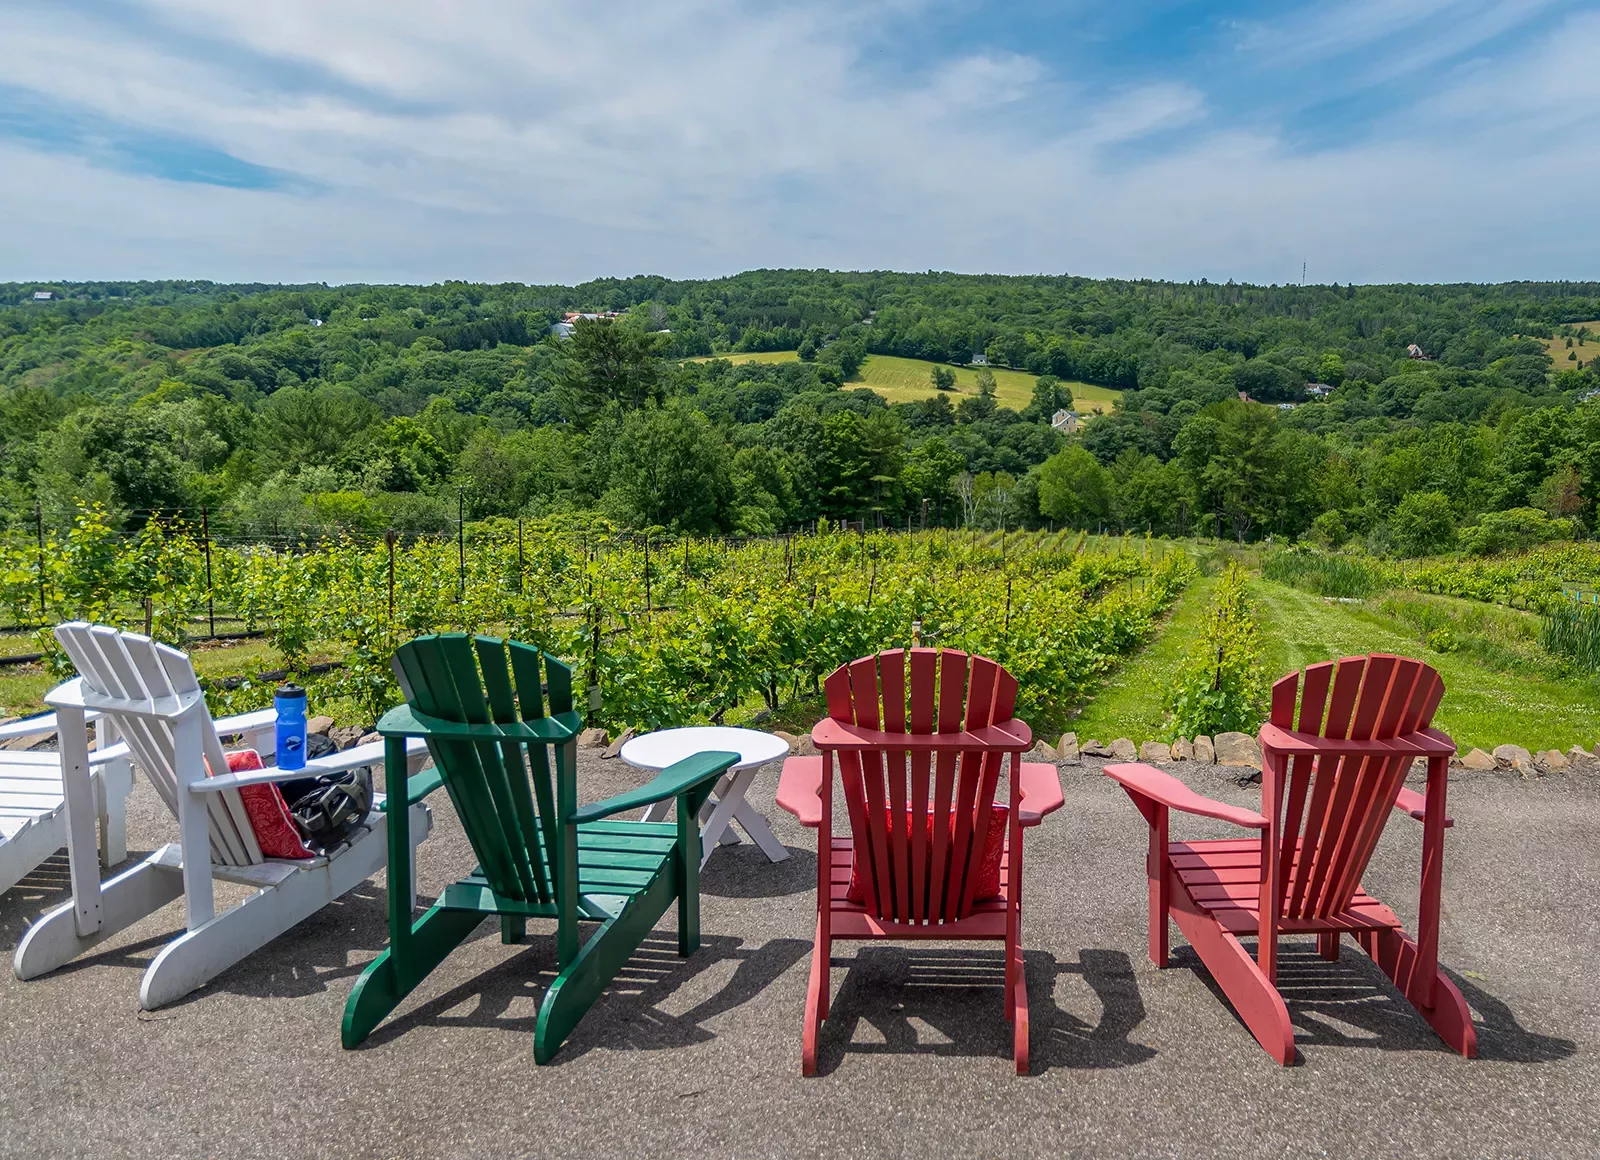 Four seats facing out towards a vineyard and forest.